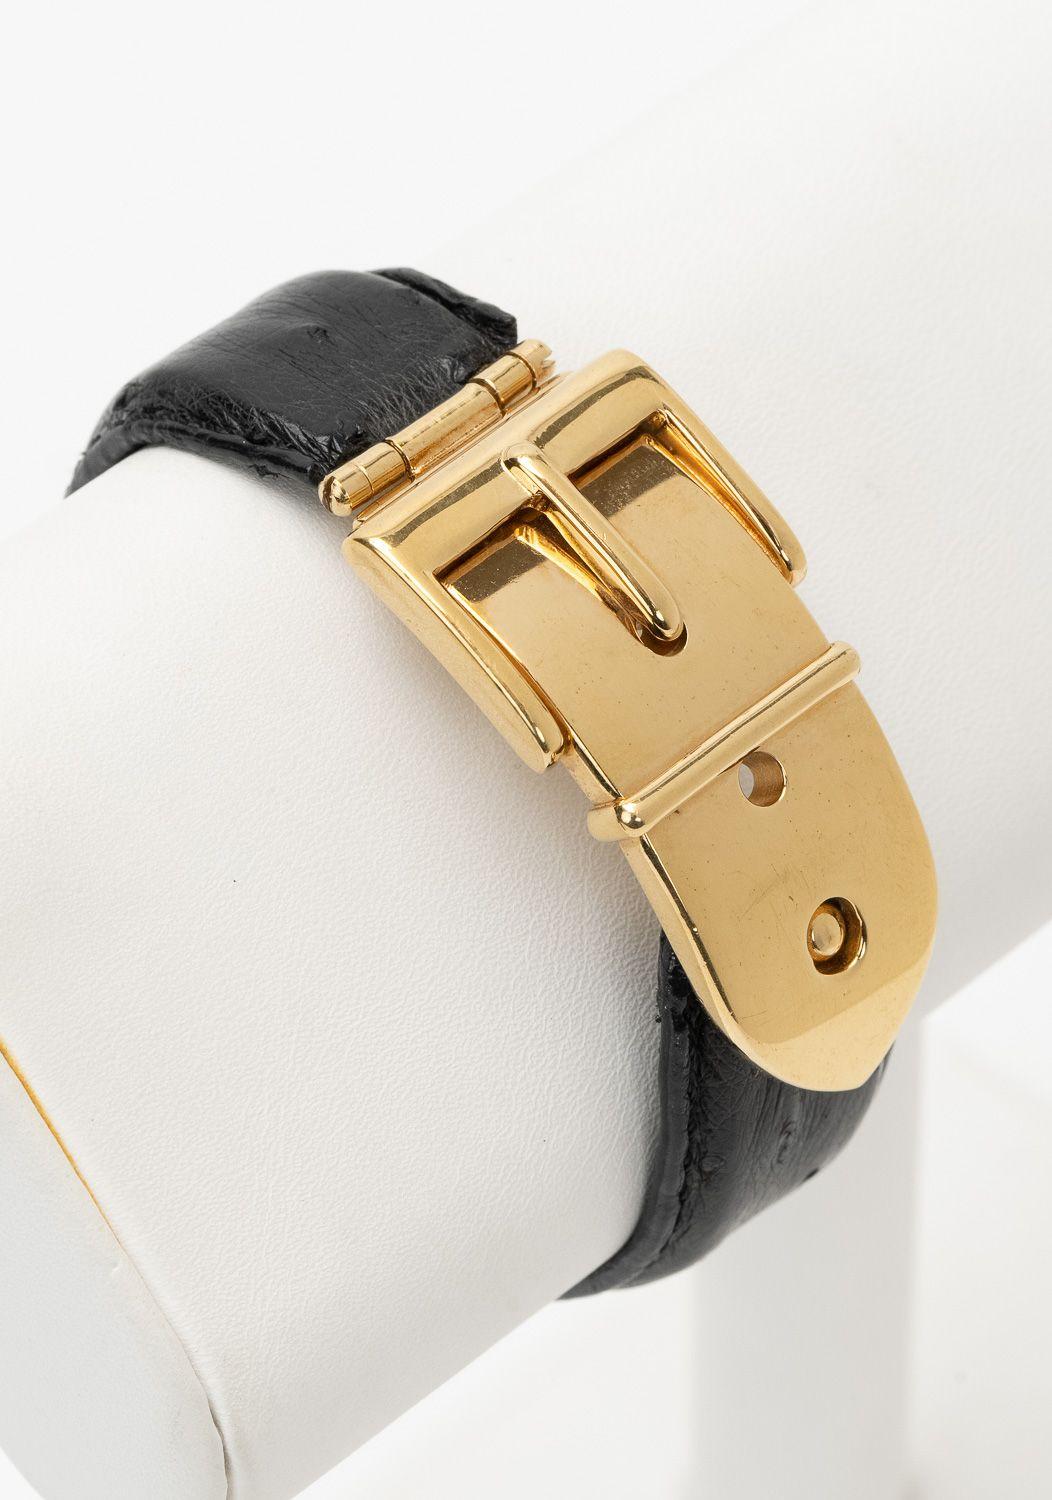 Gucci black ostrich leather cuff bracelet with gold-plated buckle hinge clasp. Clasp closure. Interior, 7.25